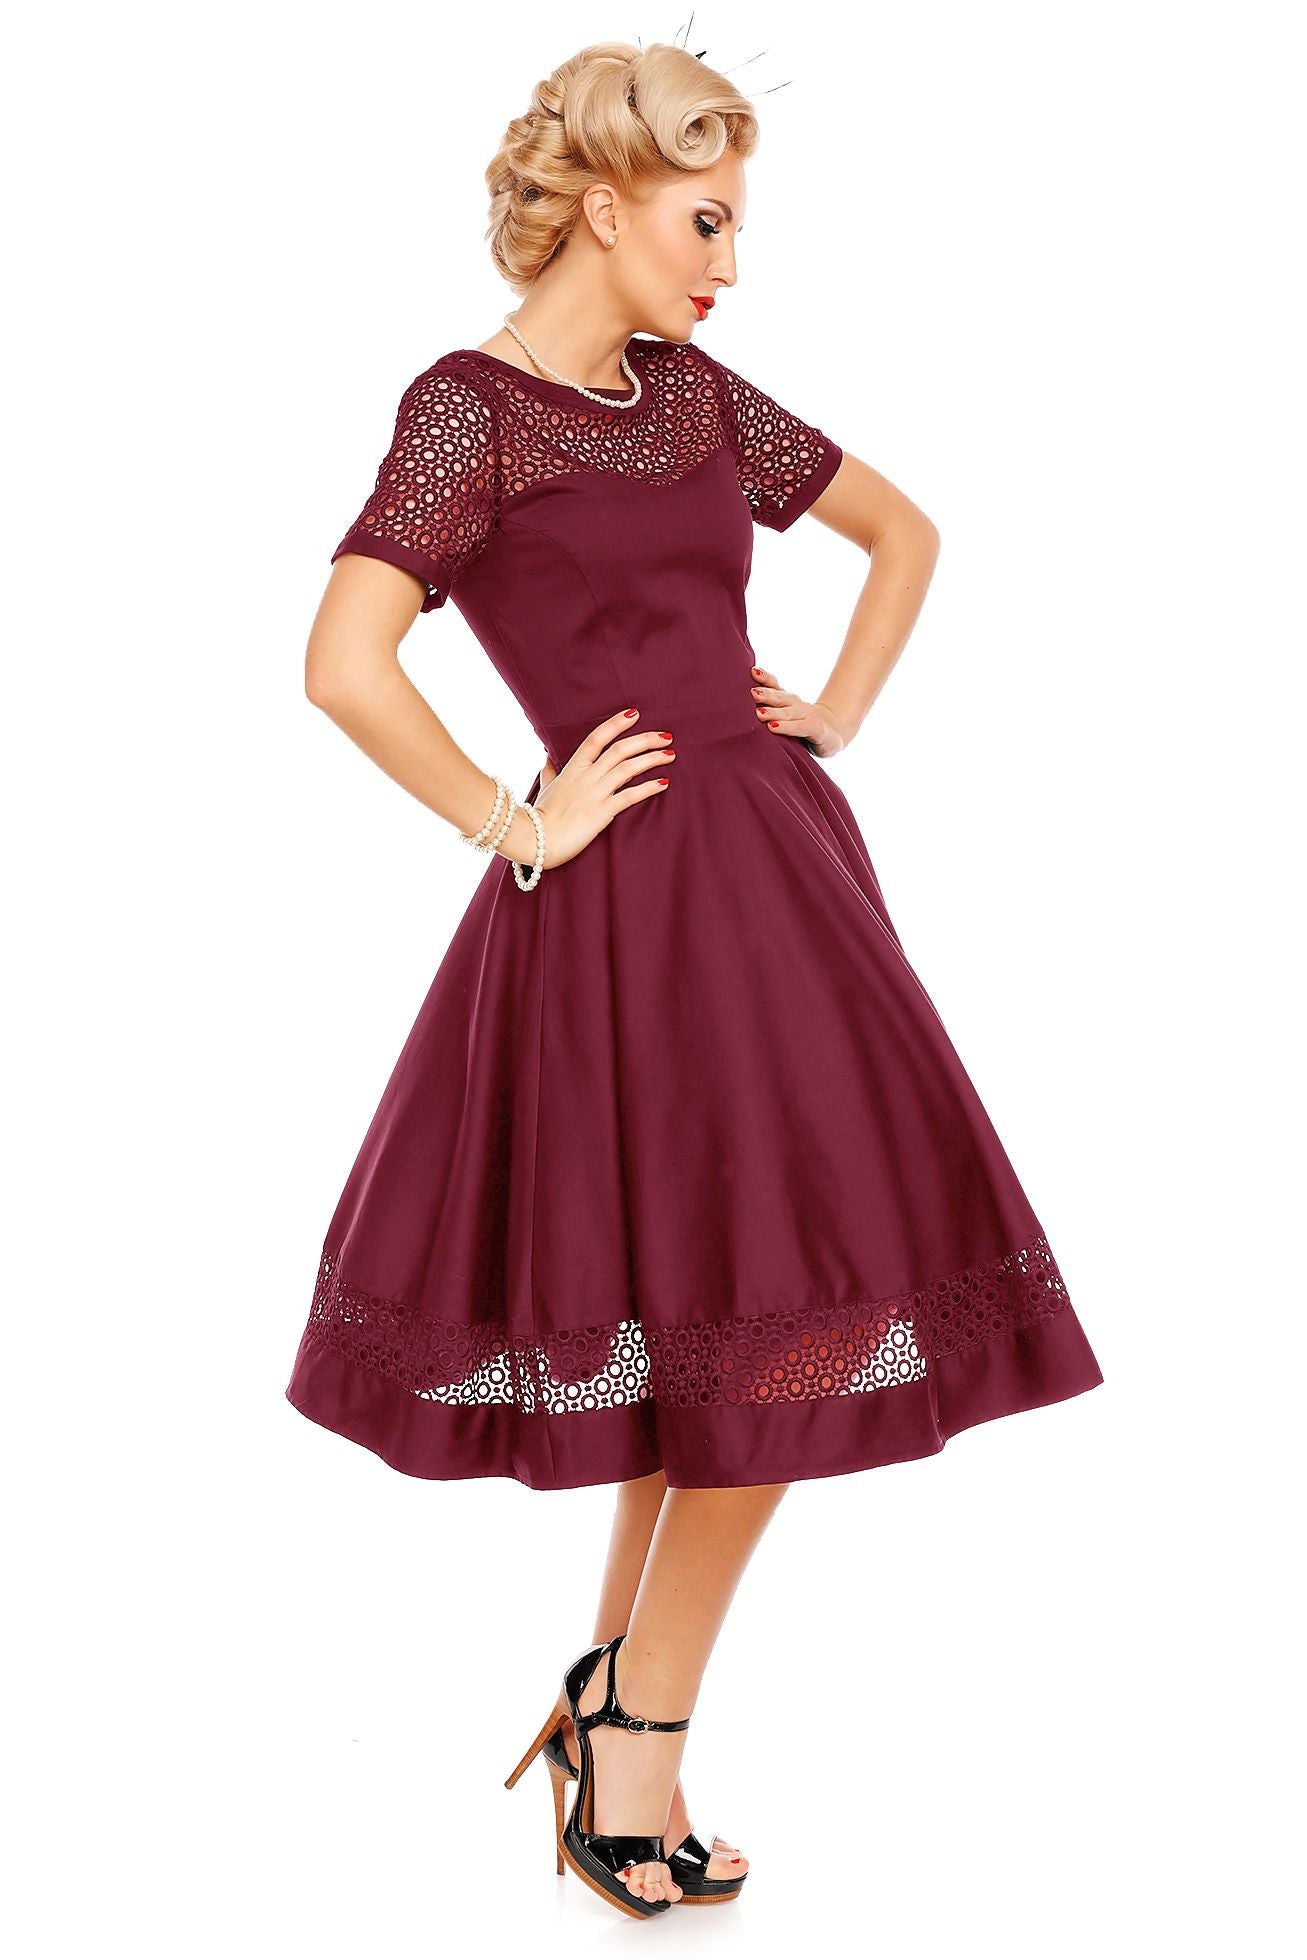 Woman's Lace Sleeved Dress in Burgundy side view